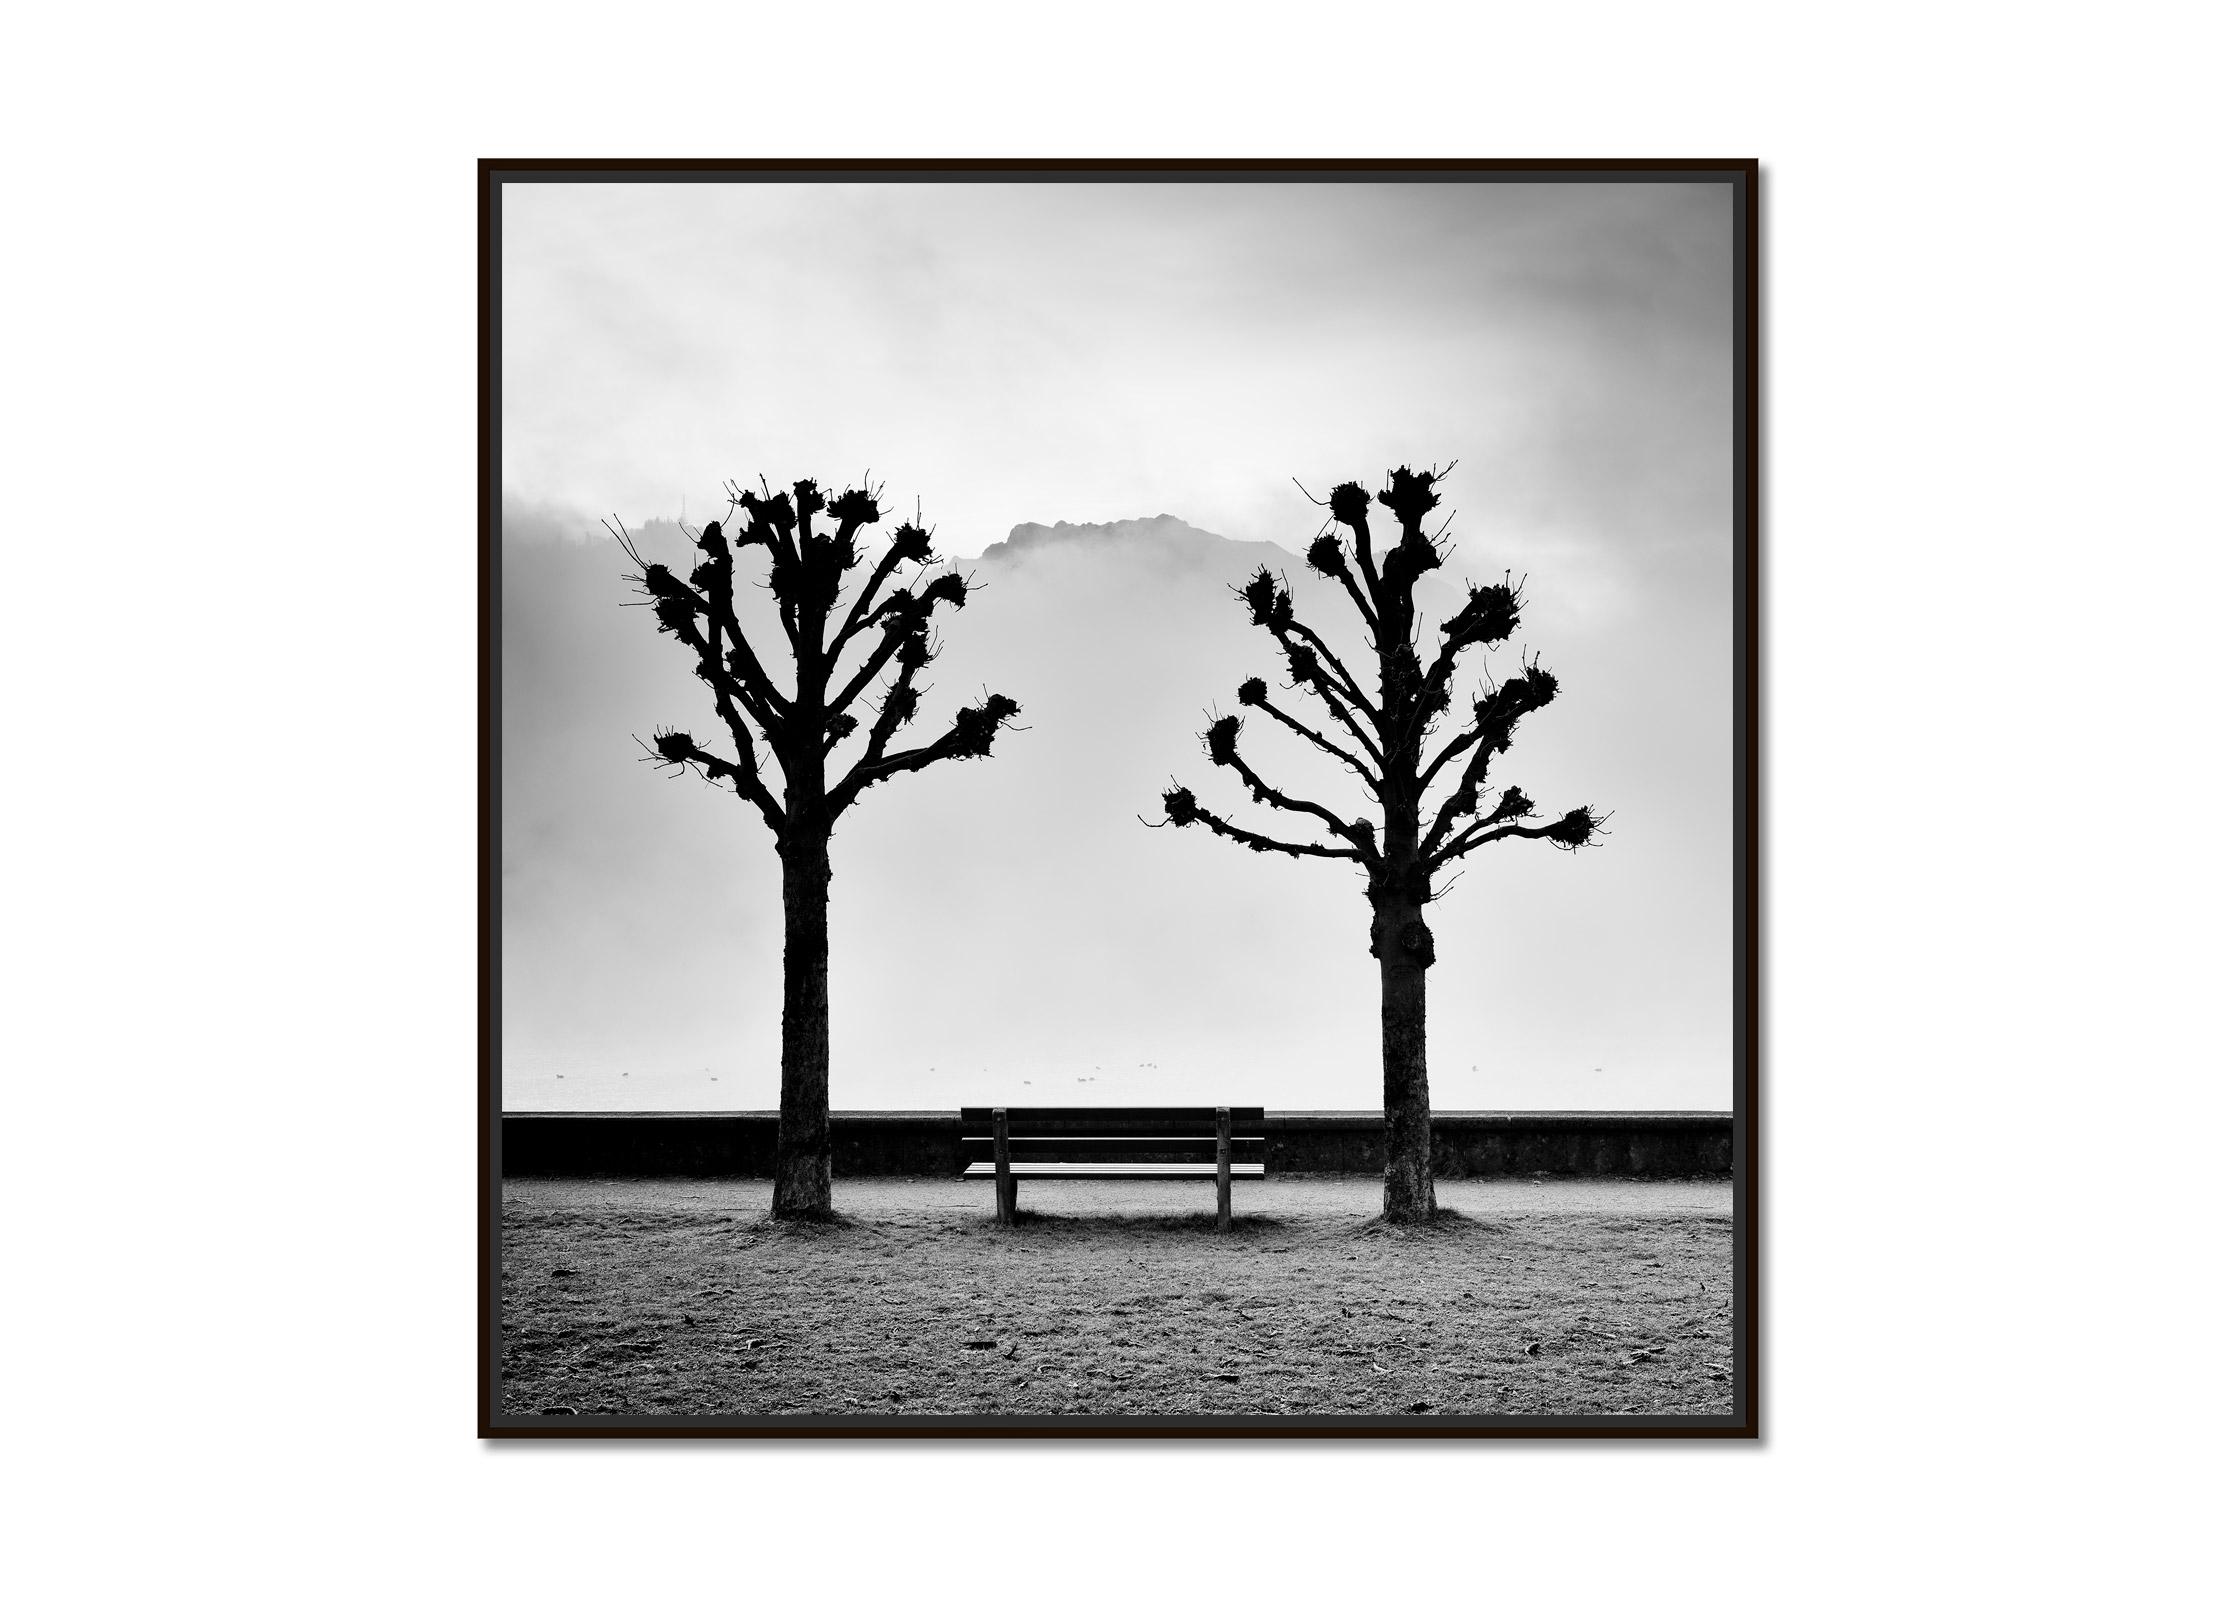 Chestnut Trees on the Promenade, Traunsee, b&w fine art photography, landscape - Print by Gerald Berghammer